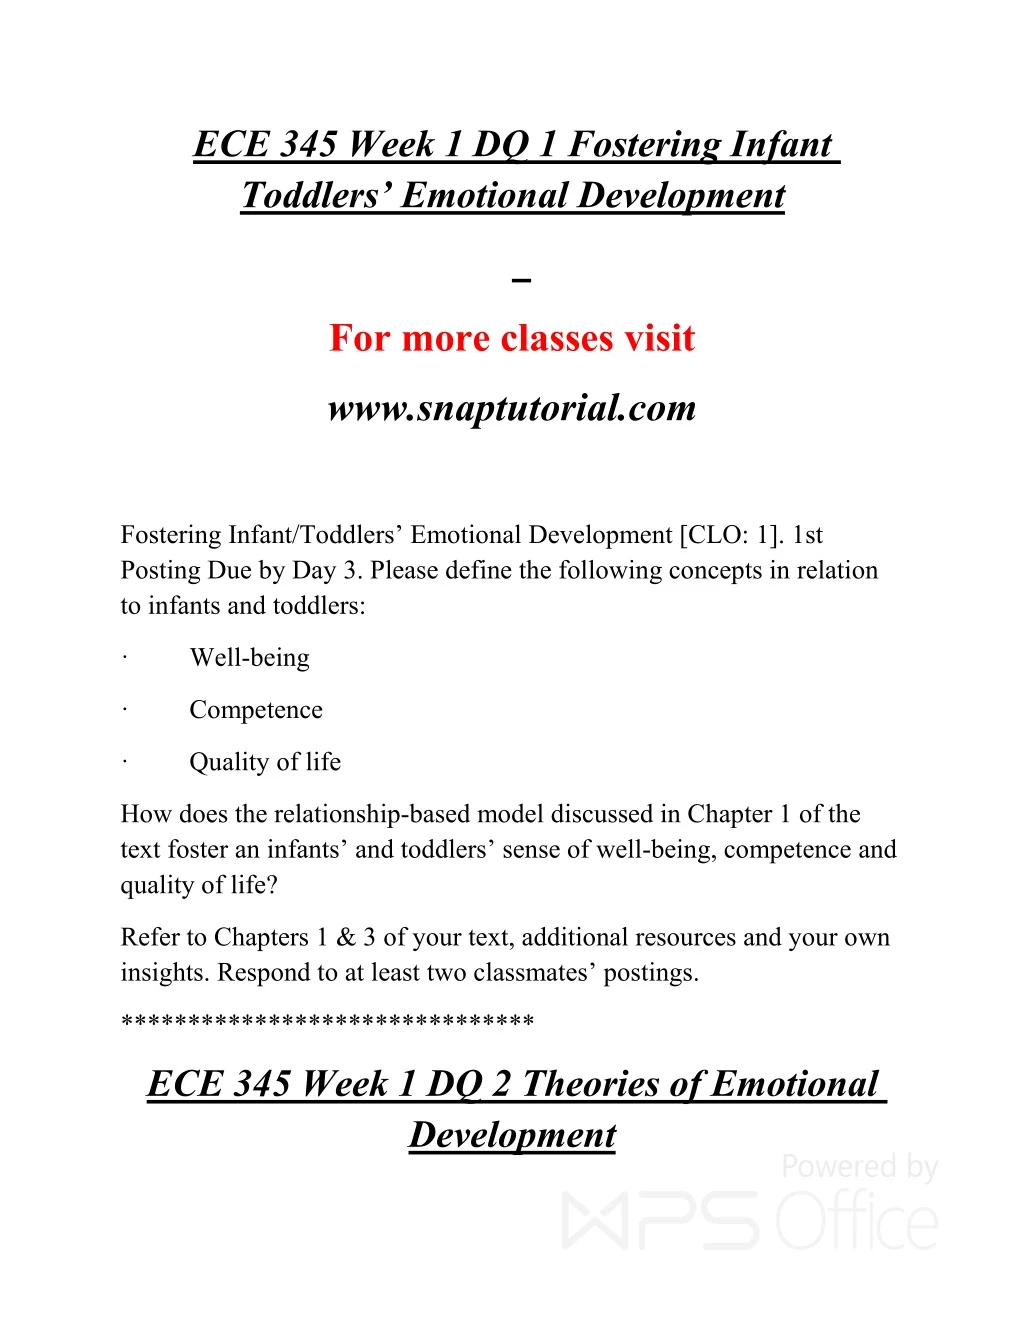 ece 345 week 1 dq 1 fostering infant toddlers